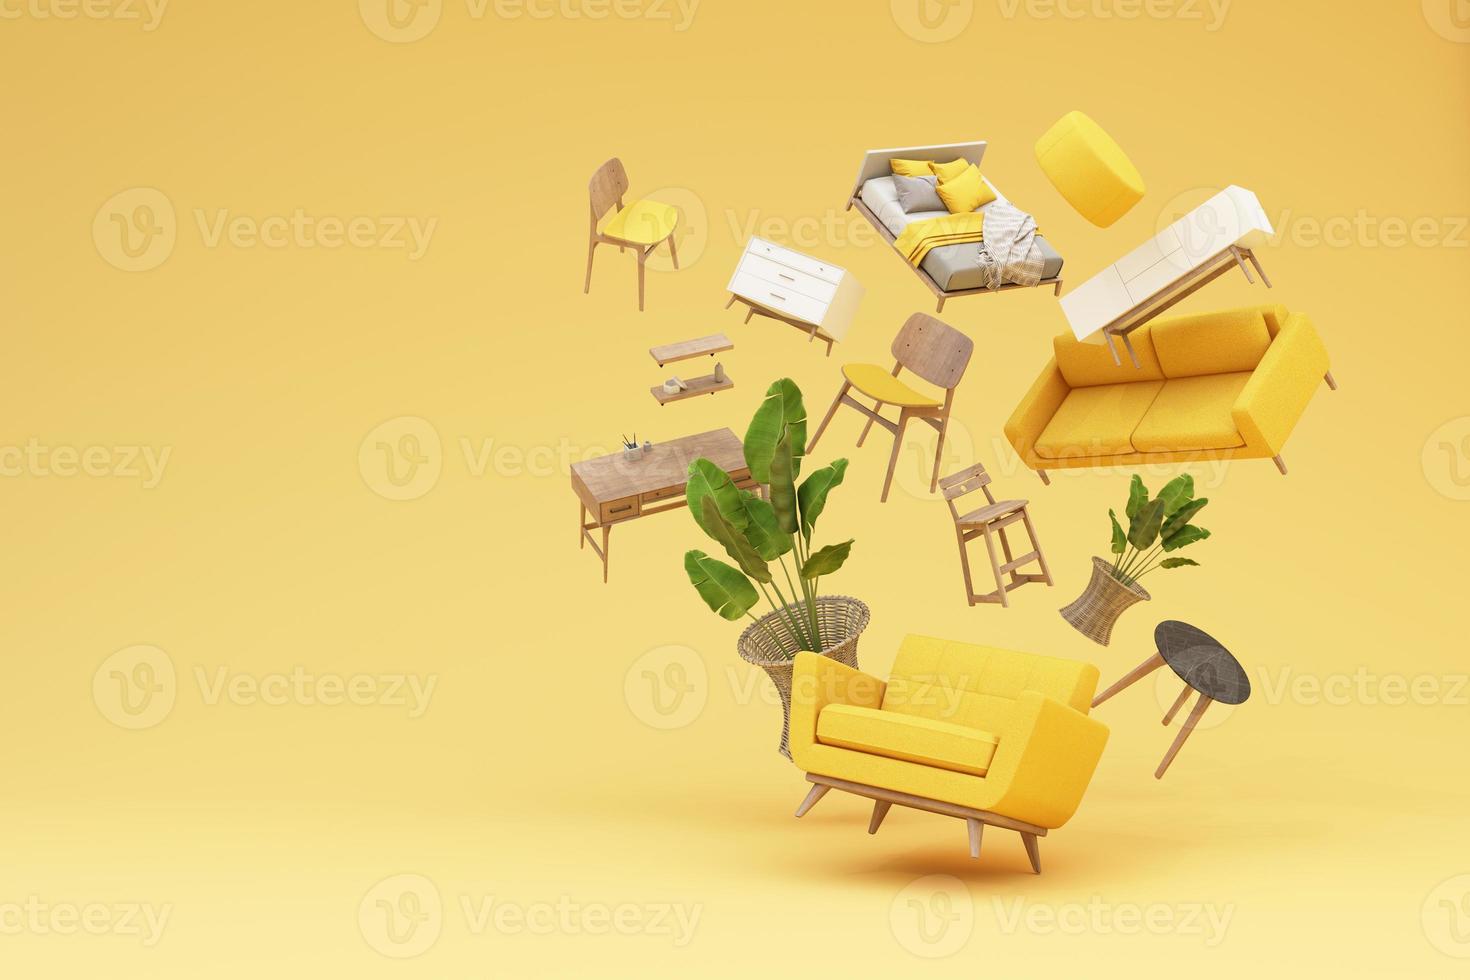 interior design concept Sale of home decorations and furniture During promotions and discounts, it is surrounded by beds, sofas, armchairs and advertising spaces banner. pastel background. 3d render photo